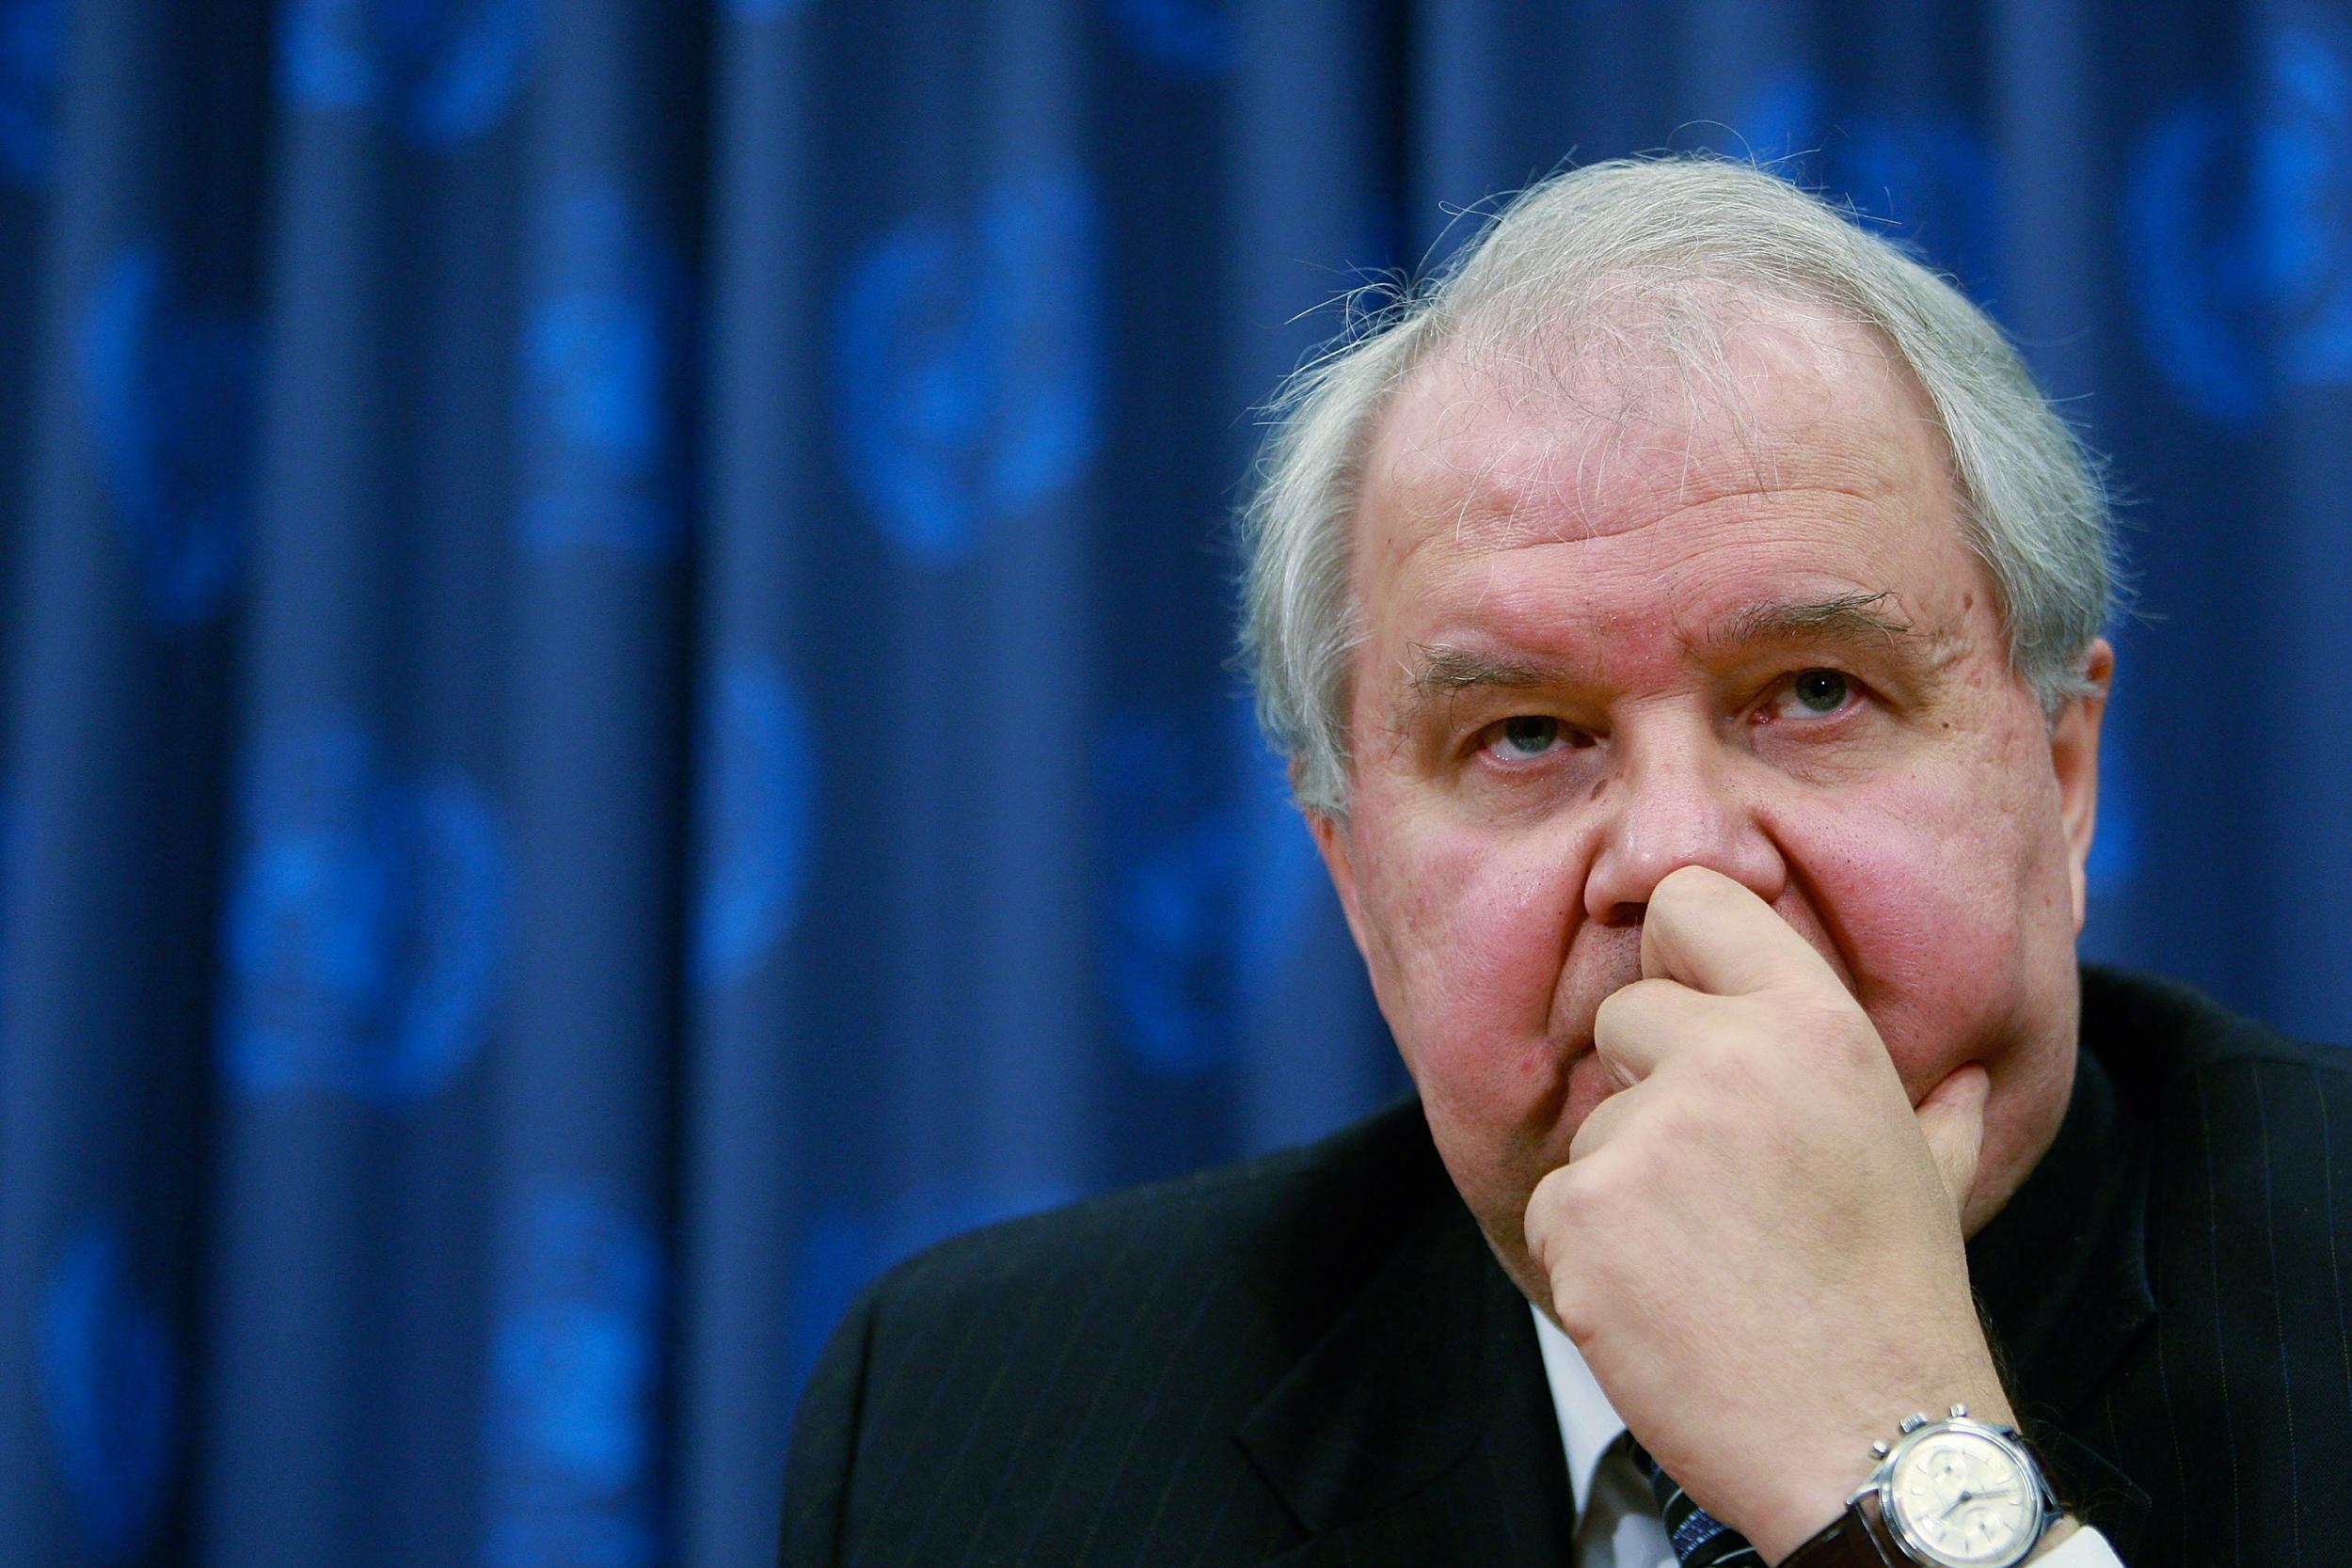 Sergey Kislyak worked hard during the election campaign to reach out to members of the Trump team